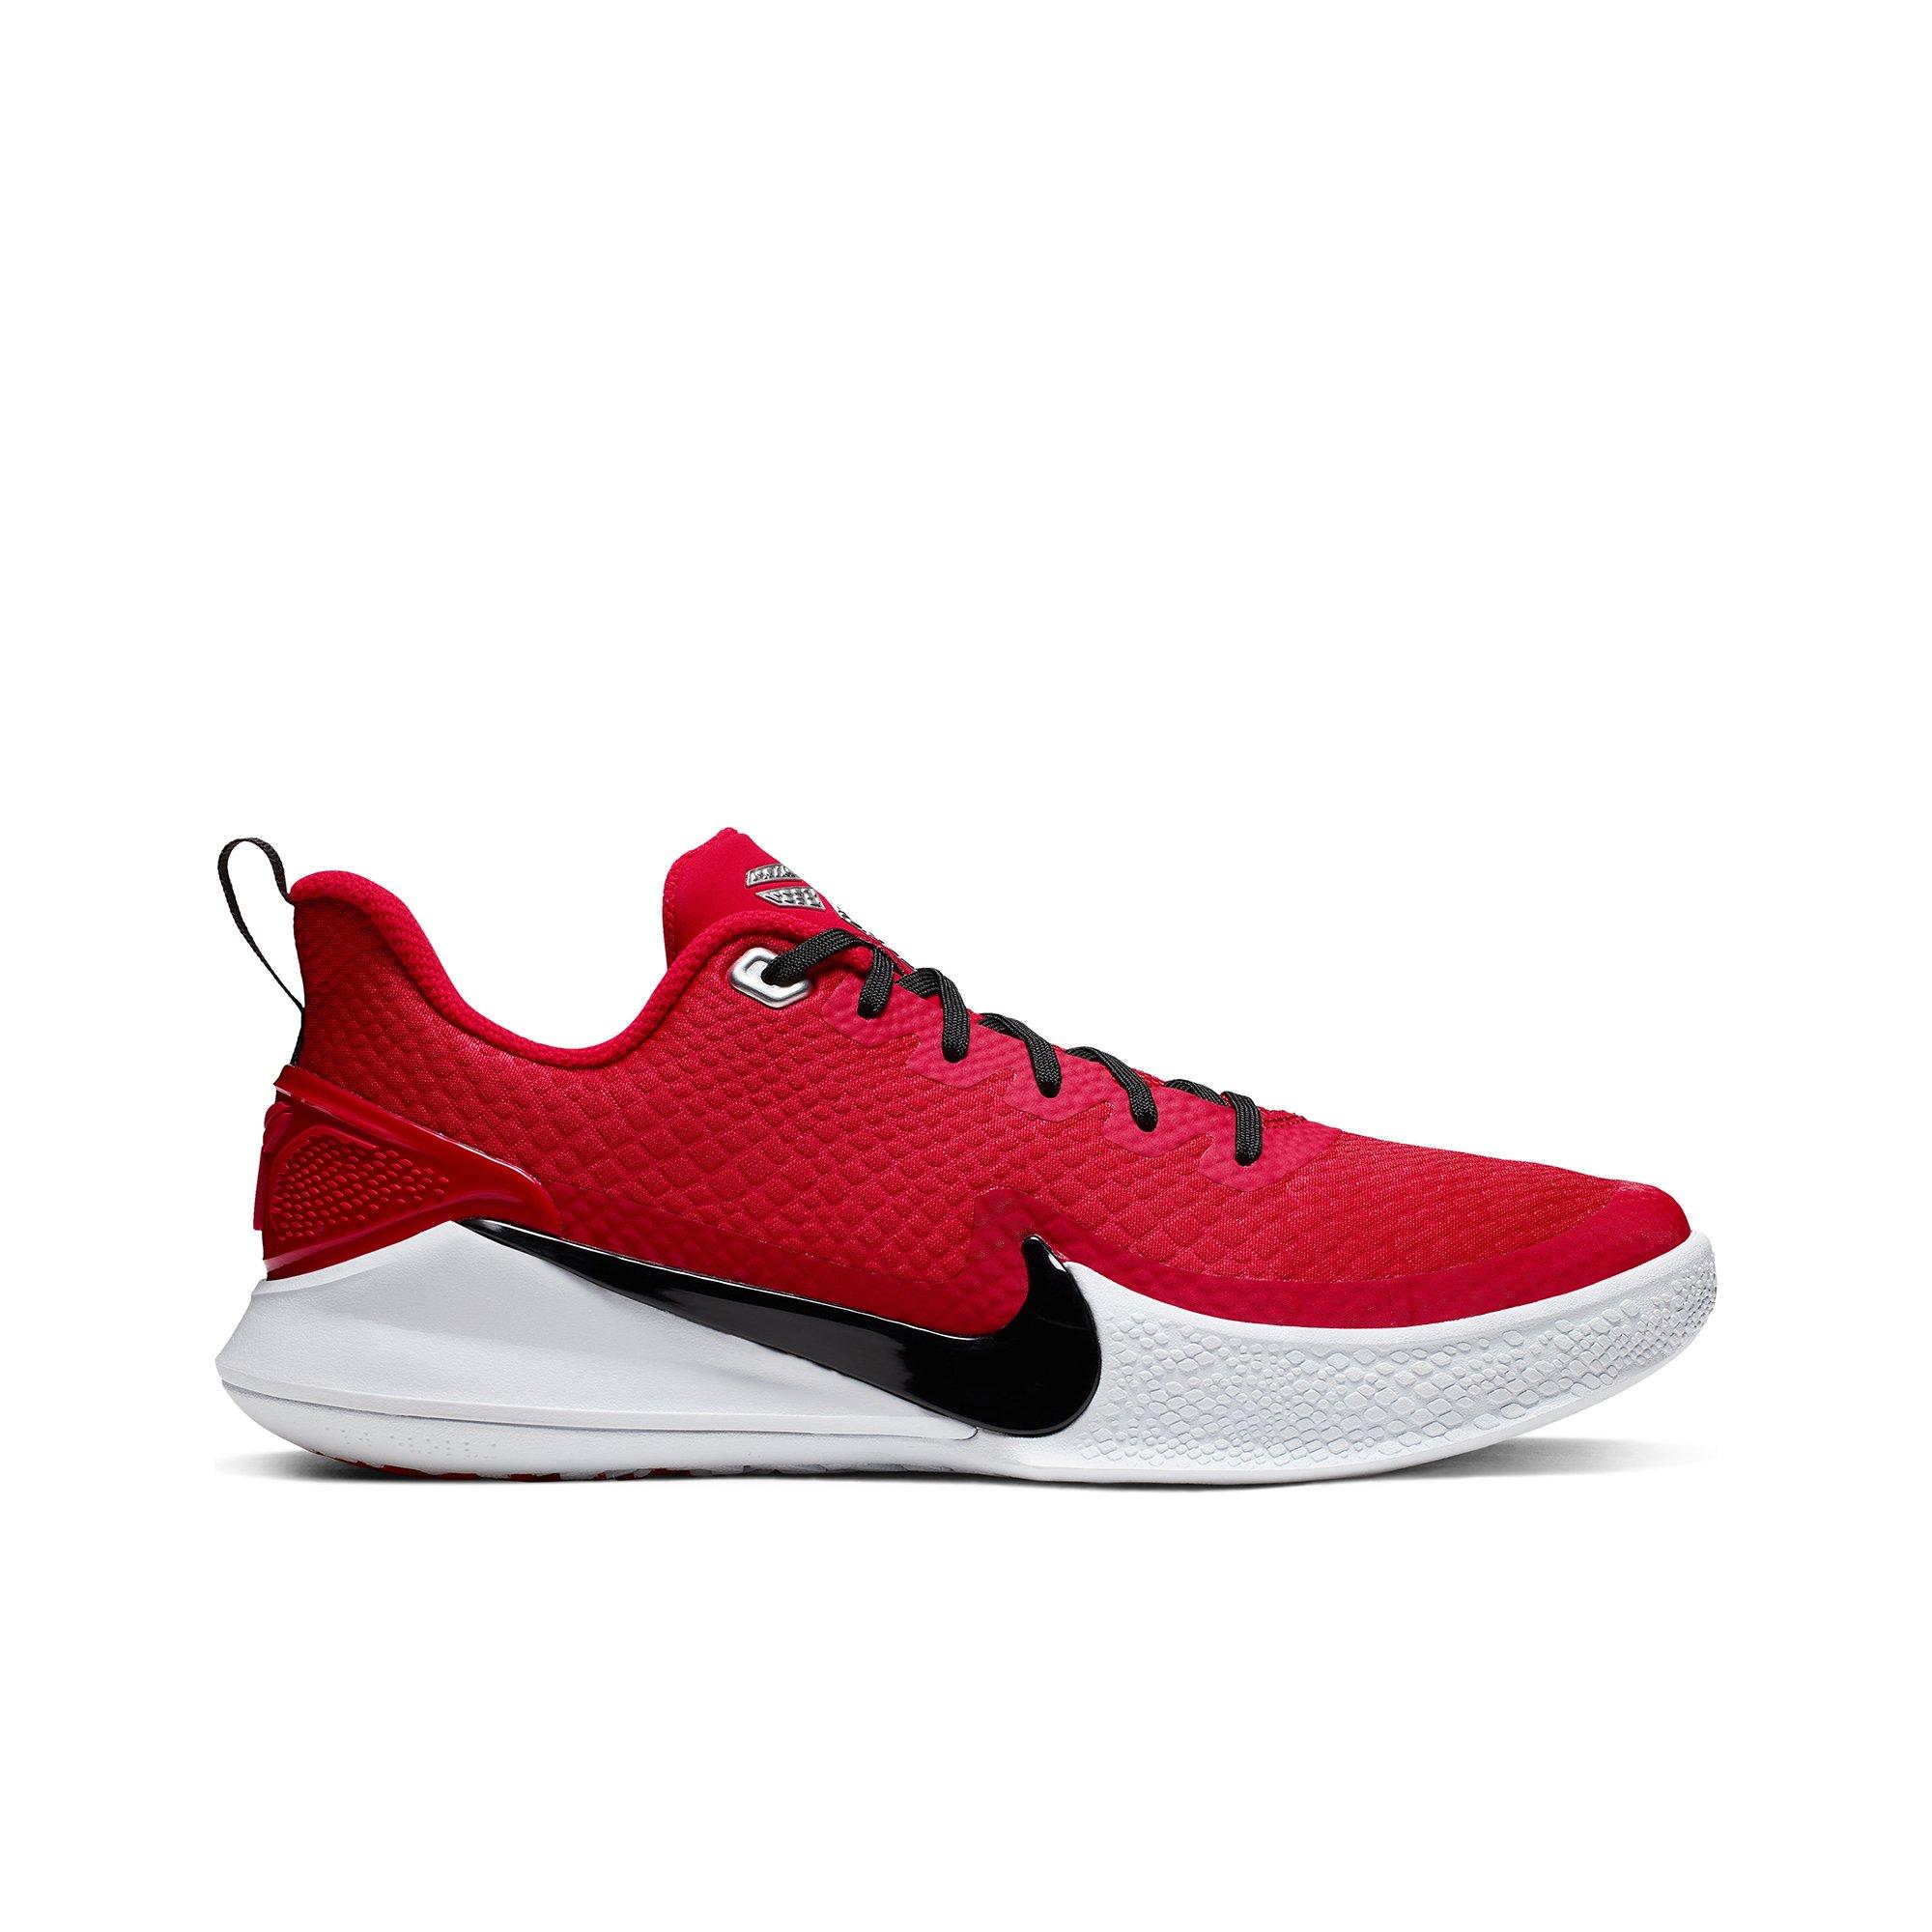 mamba focus shoes red